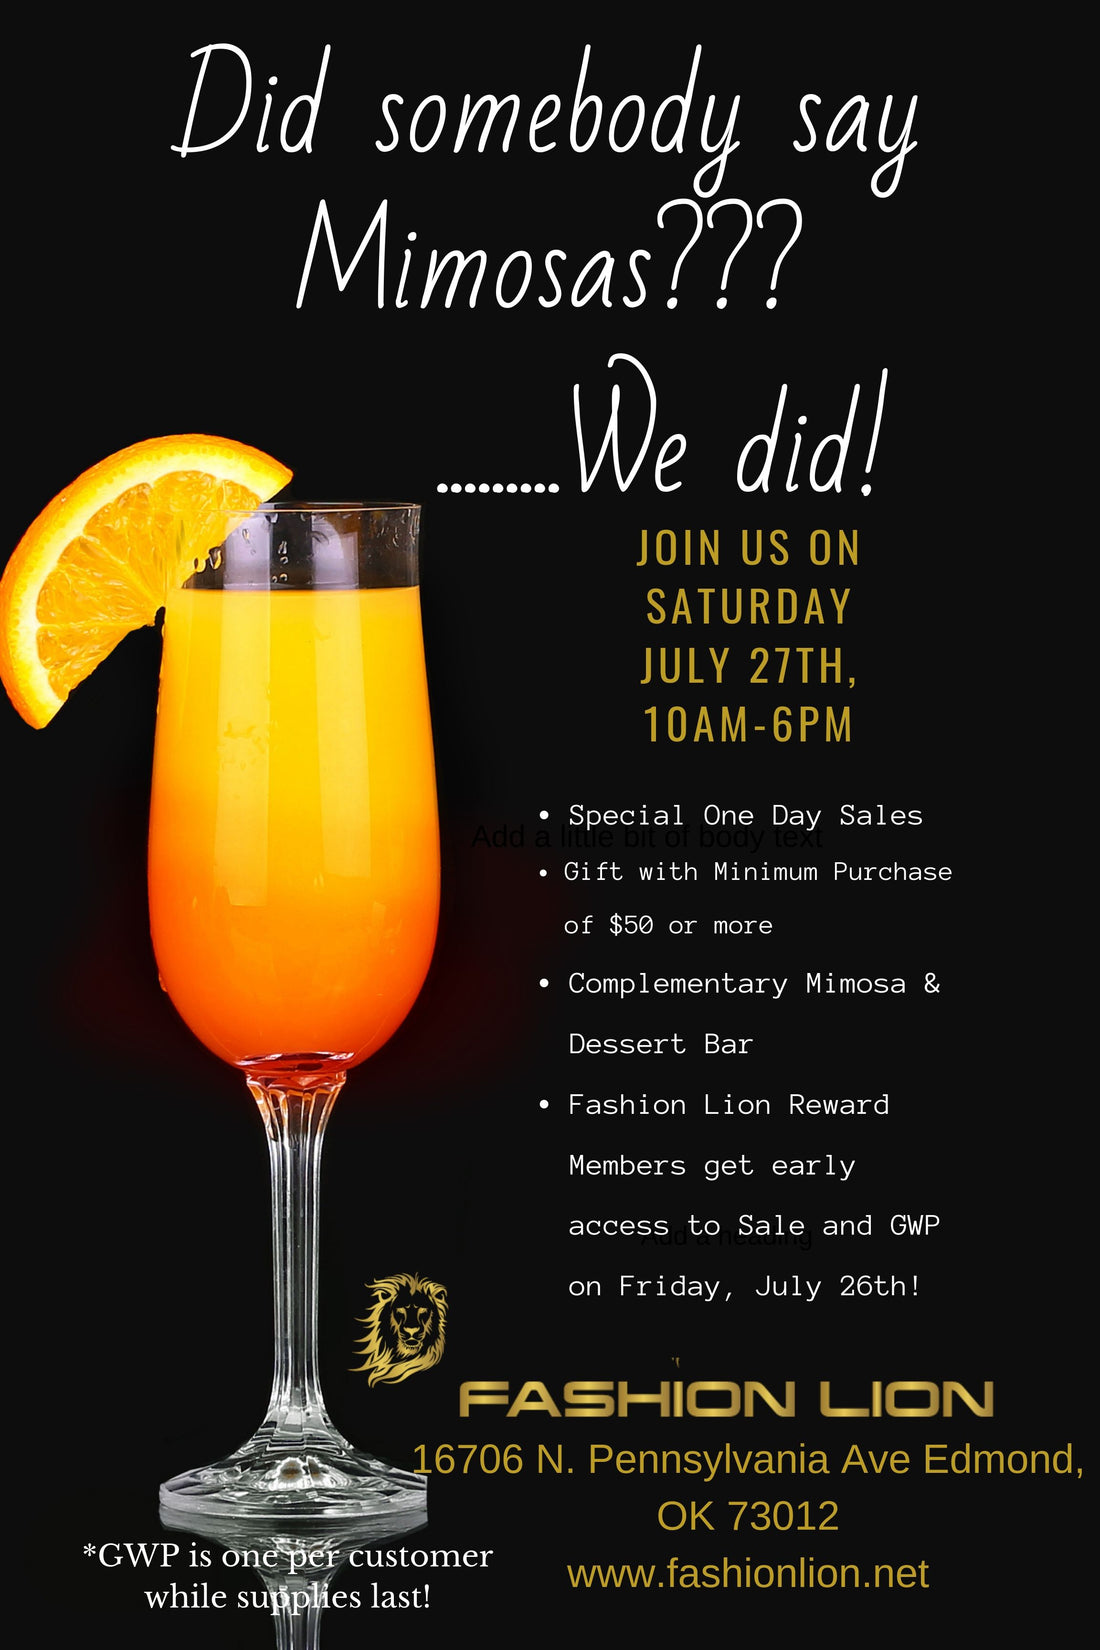 Did Somebody Say Mimosas??? We Did!